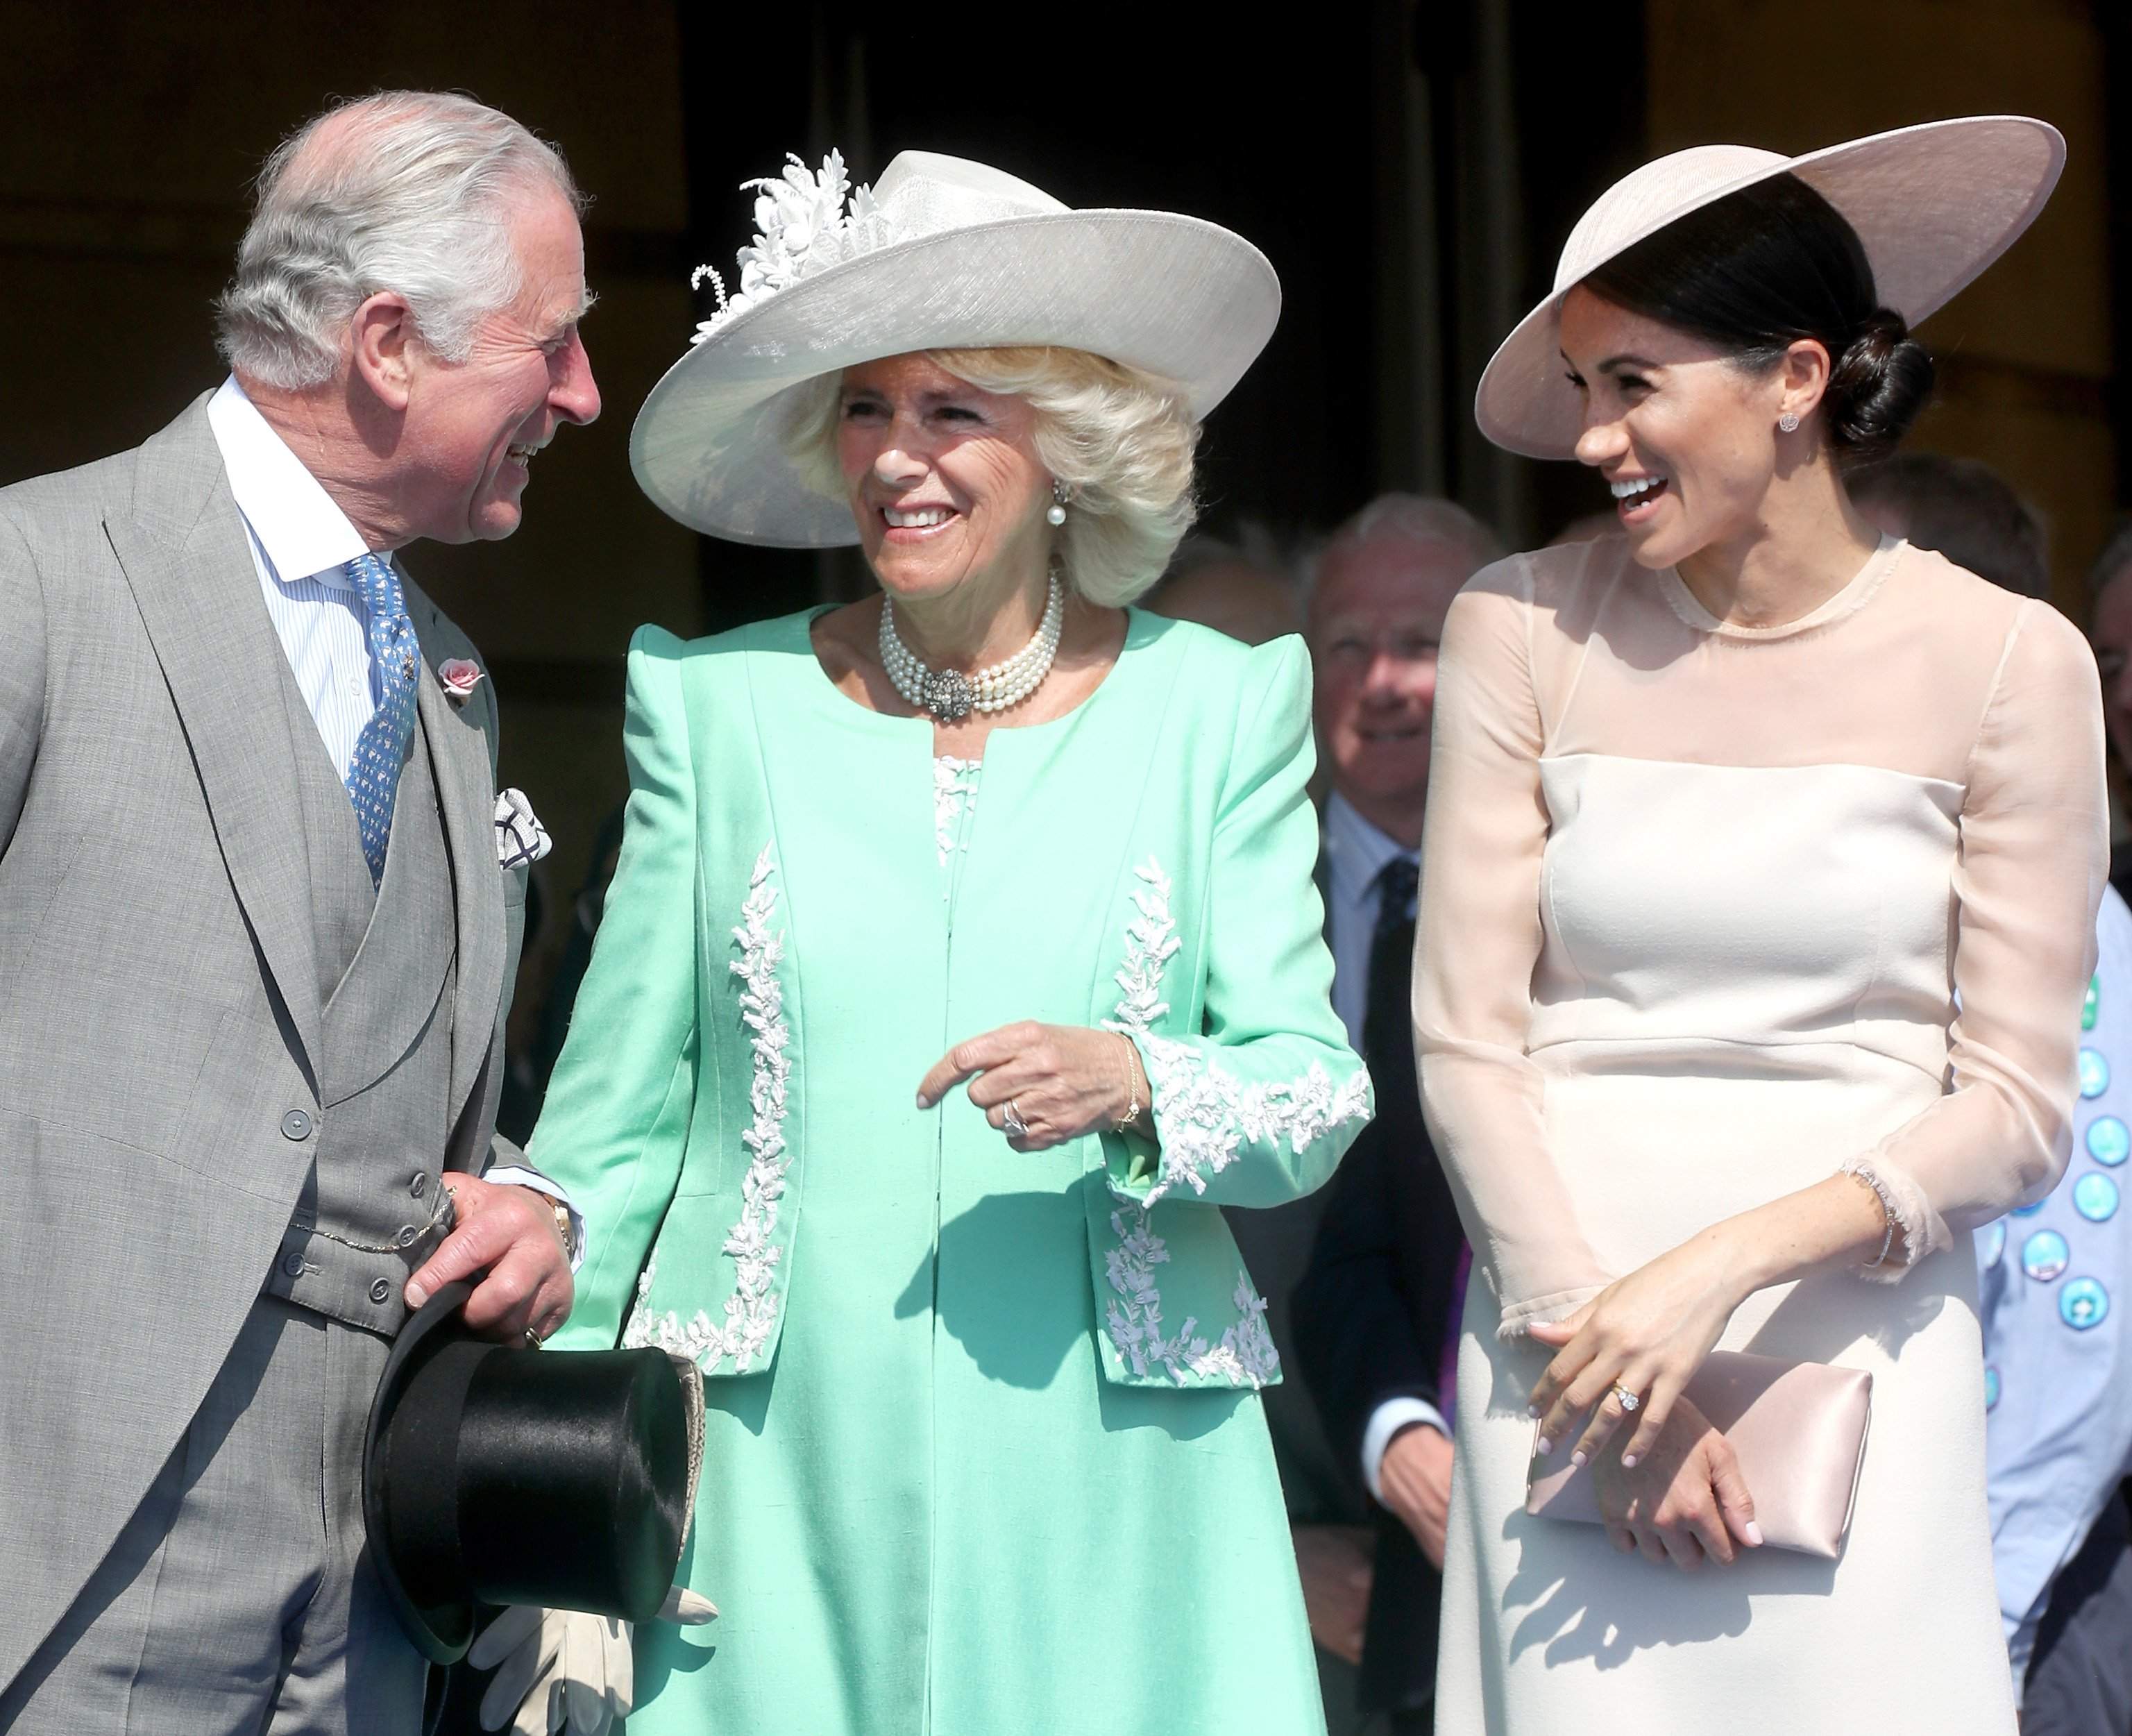 King Charles lll, Camilla, Queen Consort and Meghan, Duchess of Sussex at King Charles' 70th Birthday Patronage Celebration at Buckingham Palace on May 22, 2018 in London, England. | Source: Getty Images